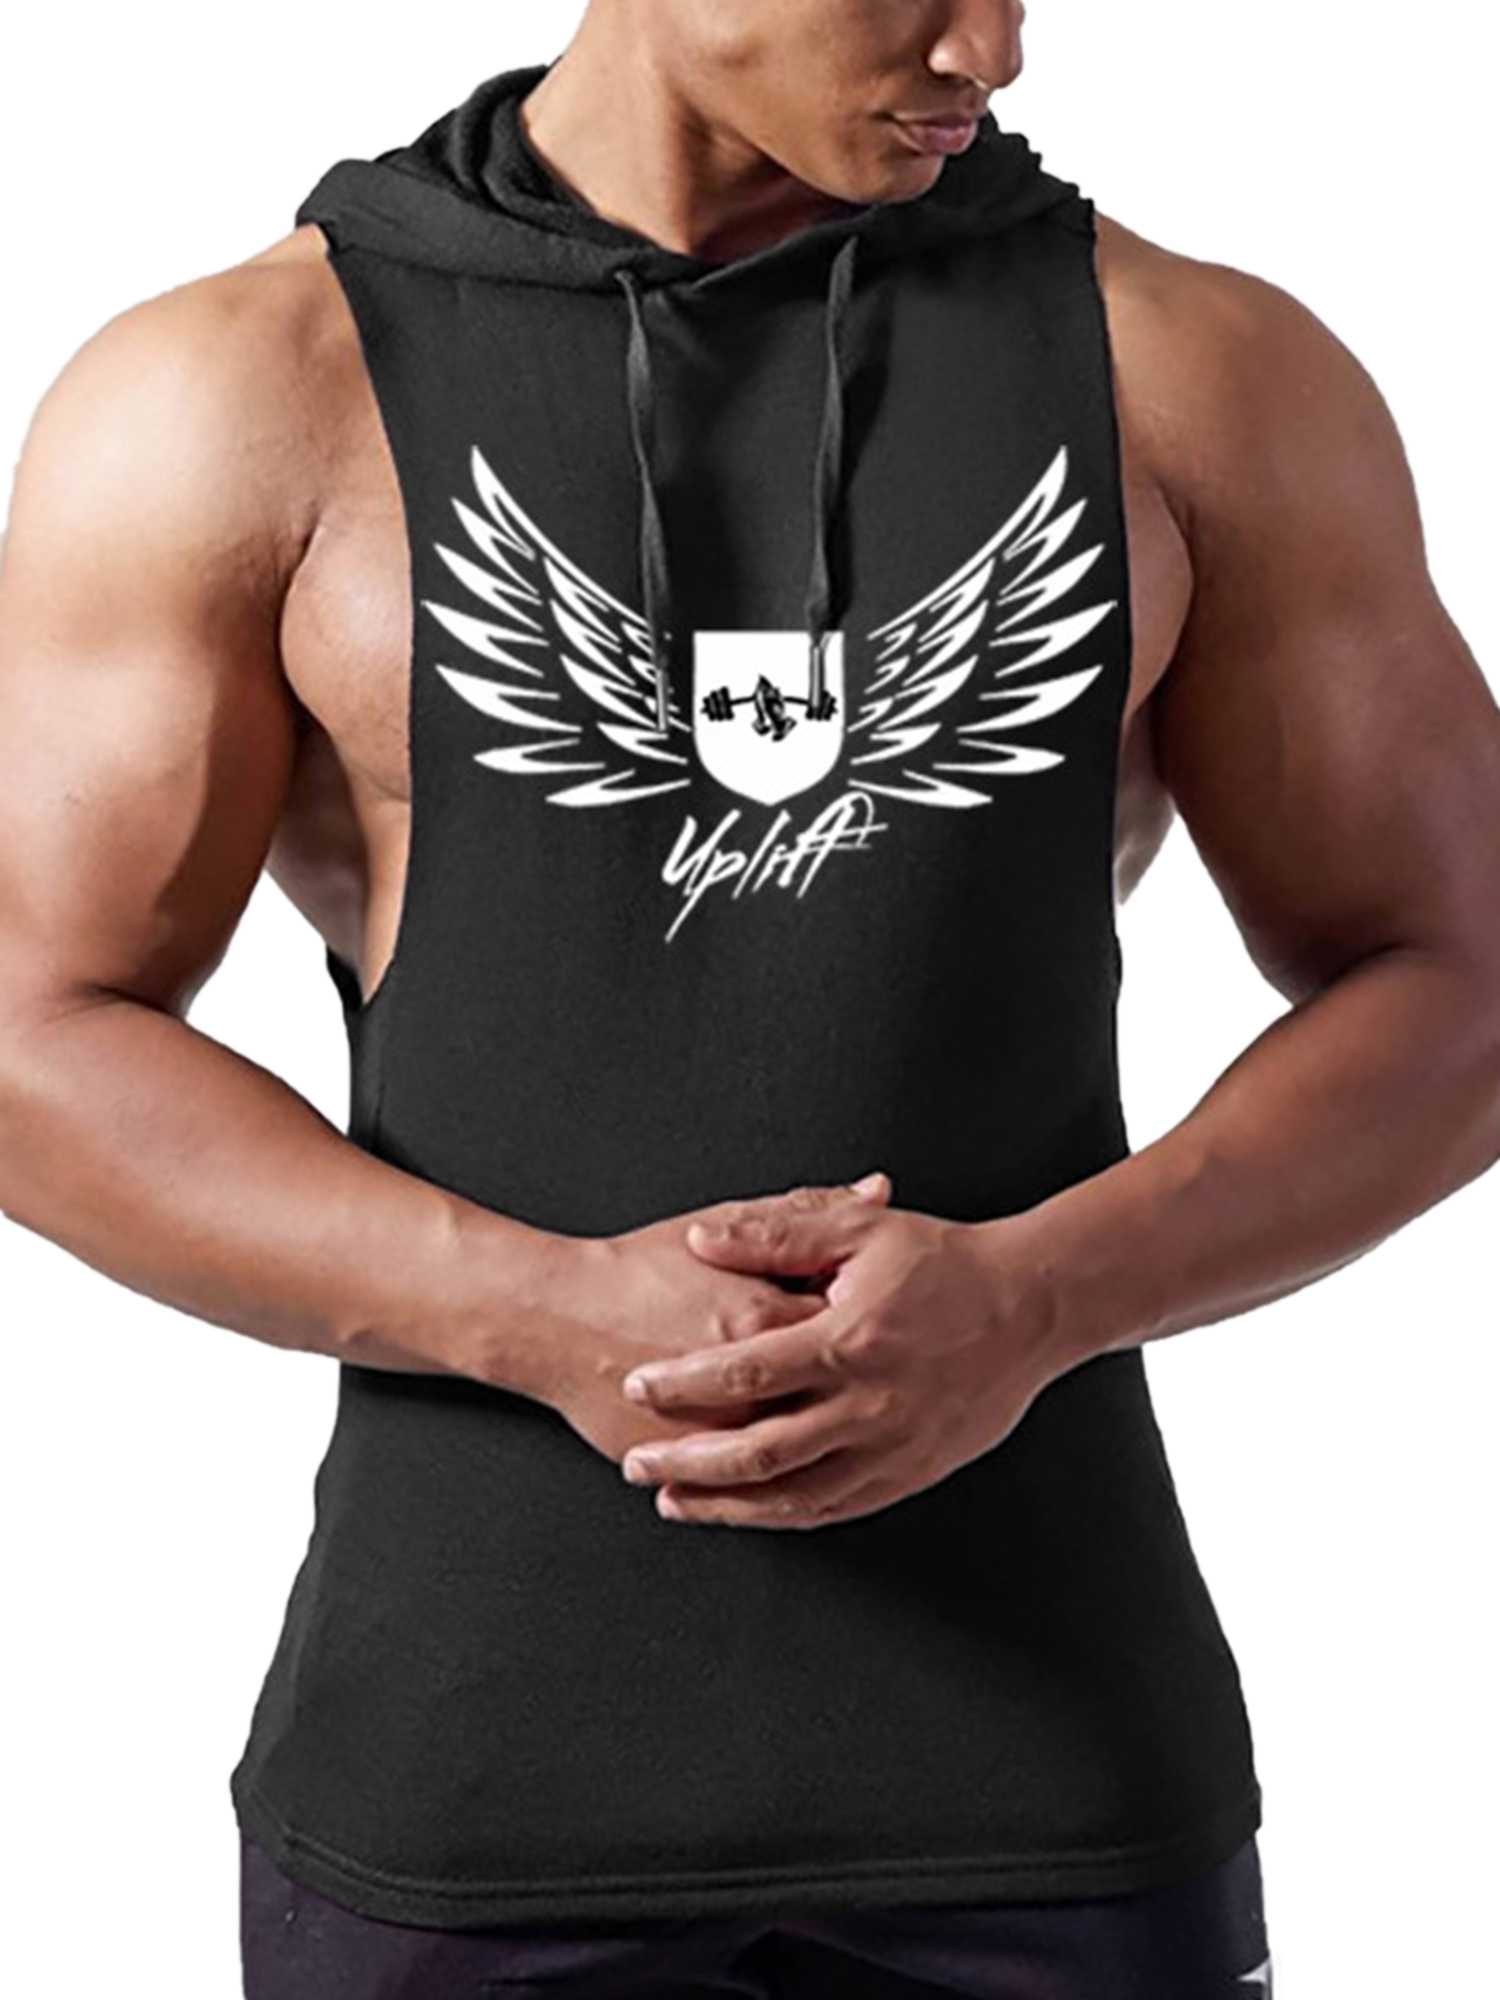 Details about  / Men/'s Muscle T shirt Workout Tank Tops Gym Fitness Sleeveless Hoodies Activewear